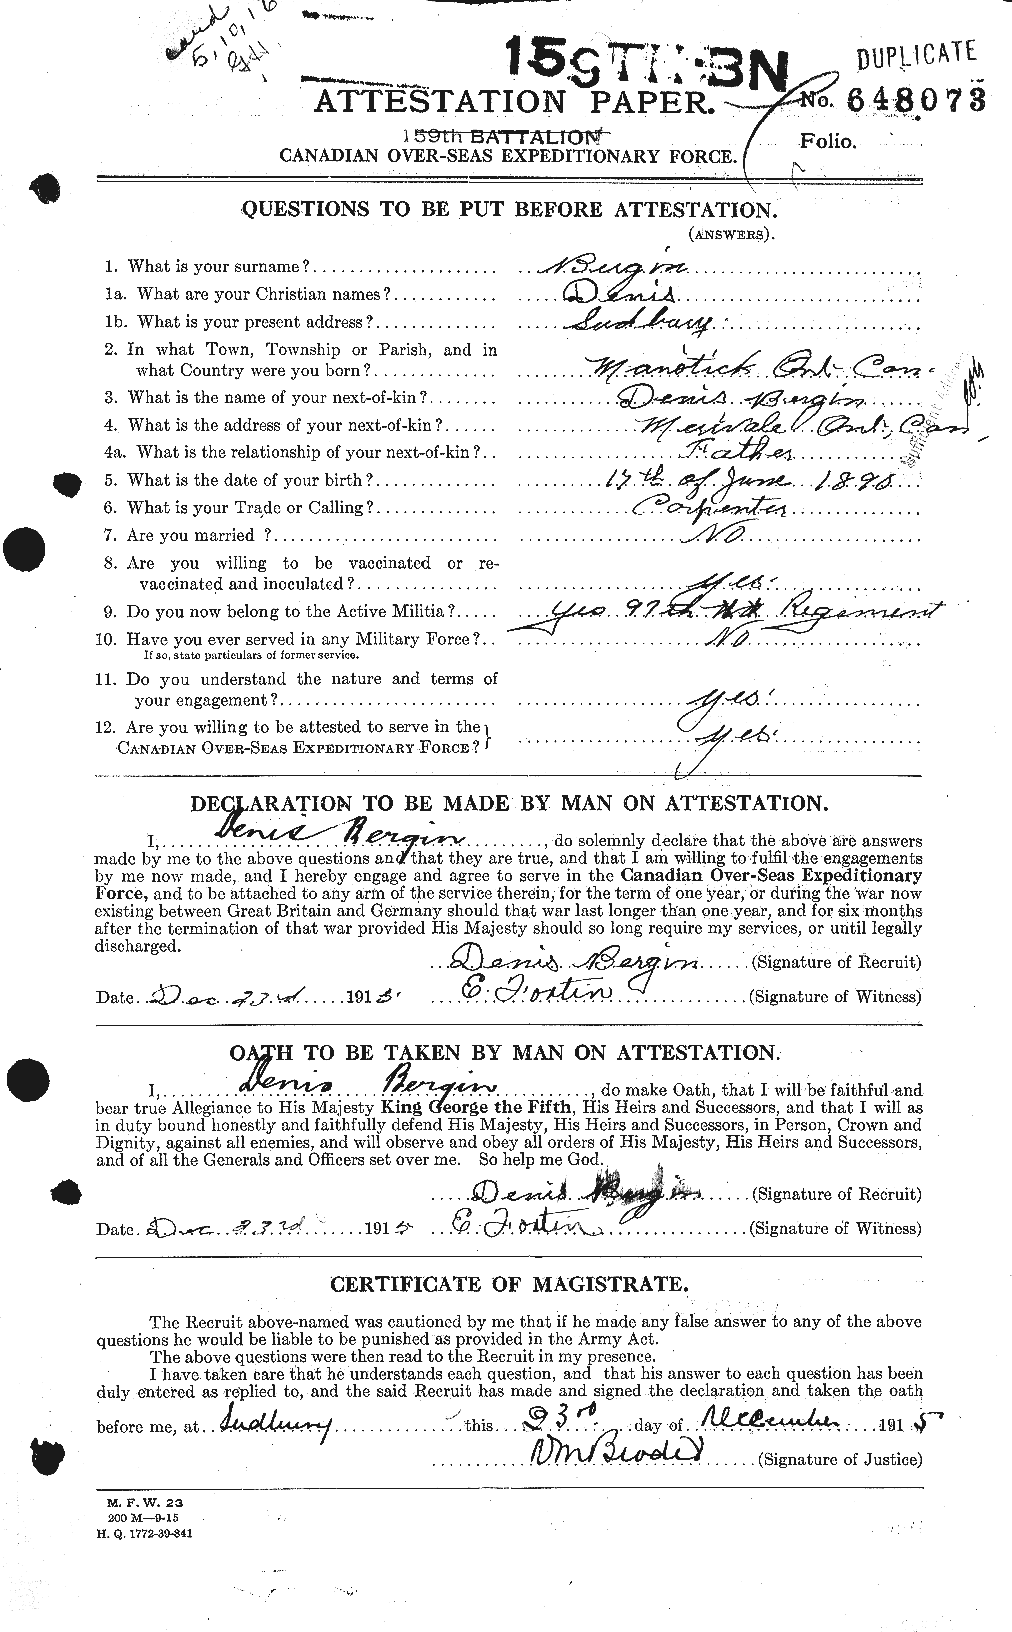 Personnel Records of the First World War - CEF 232879a